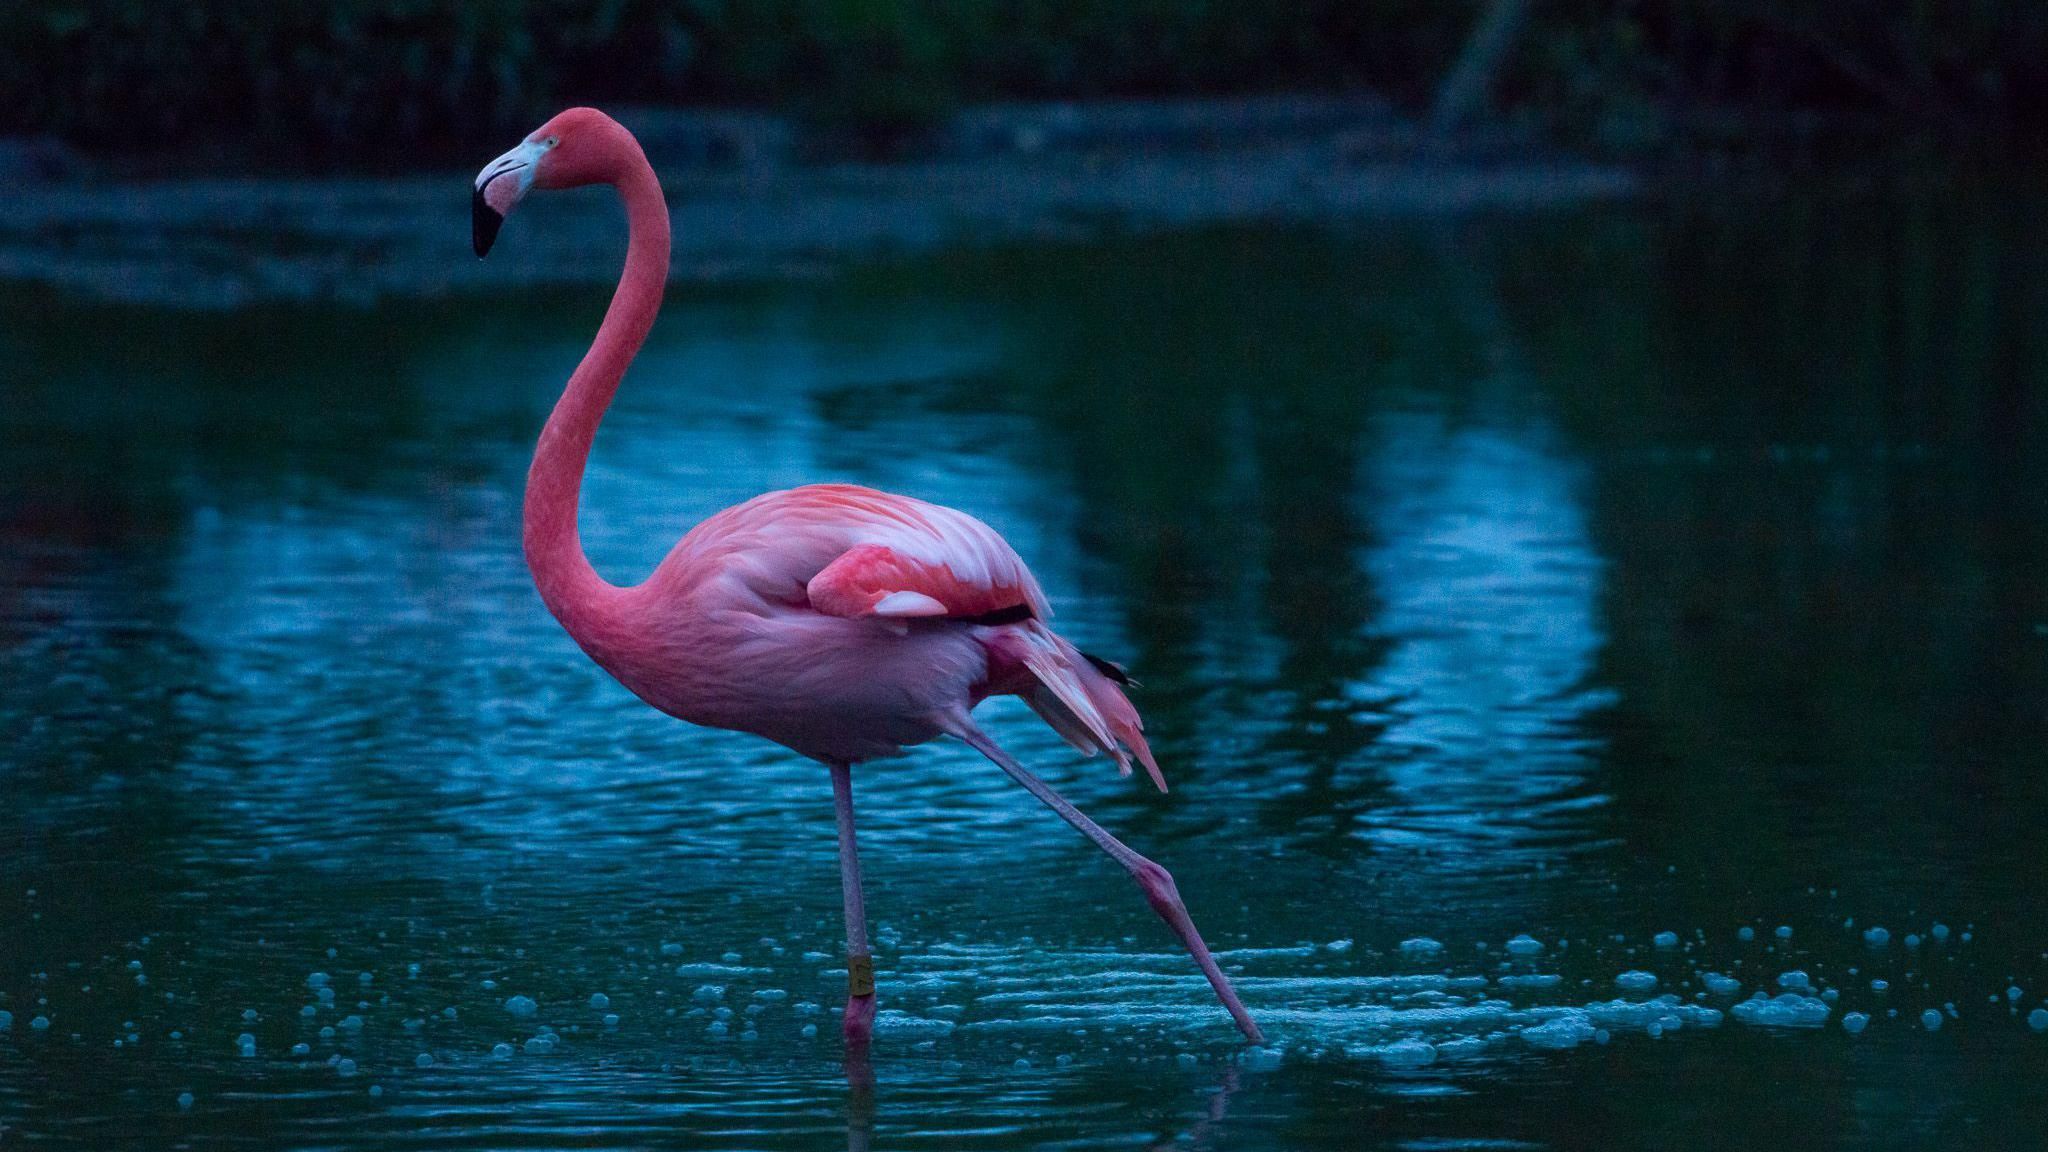 Flamingo on one leg in the water.